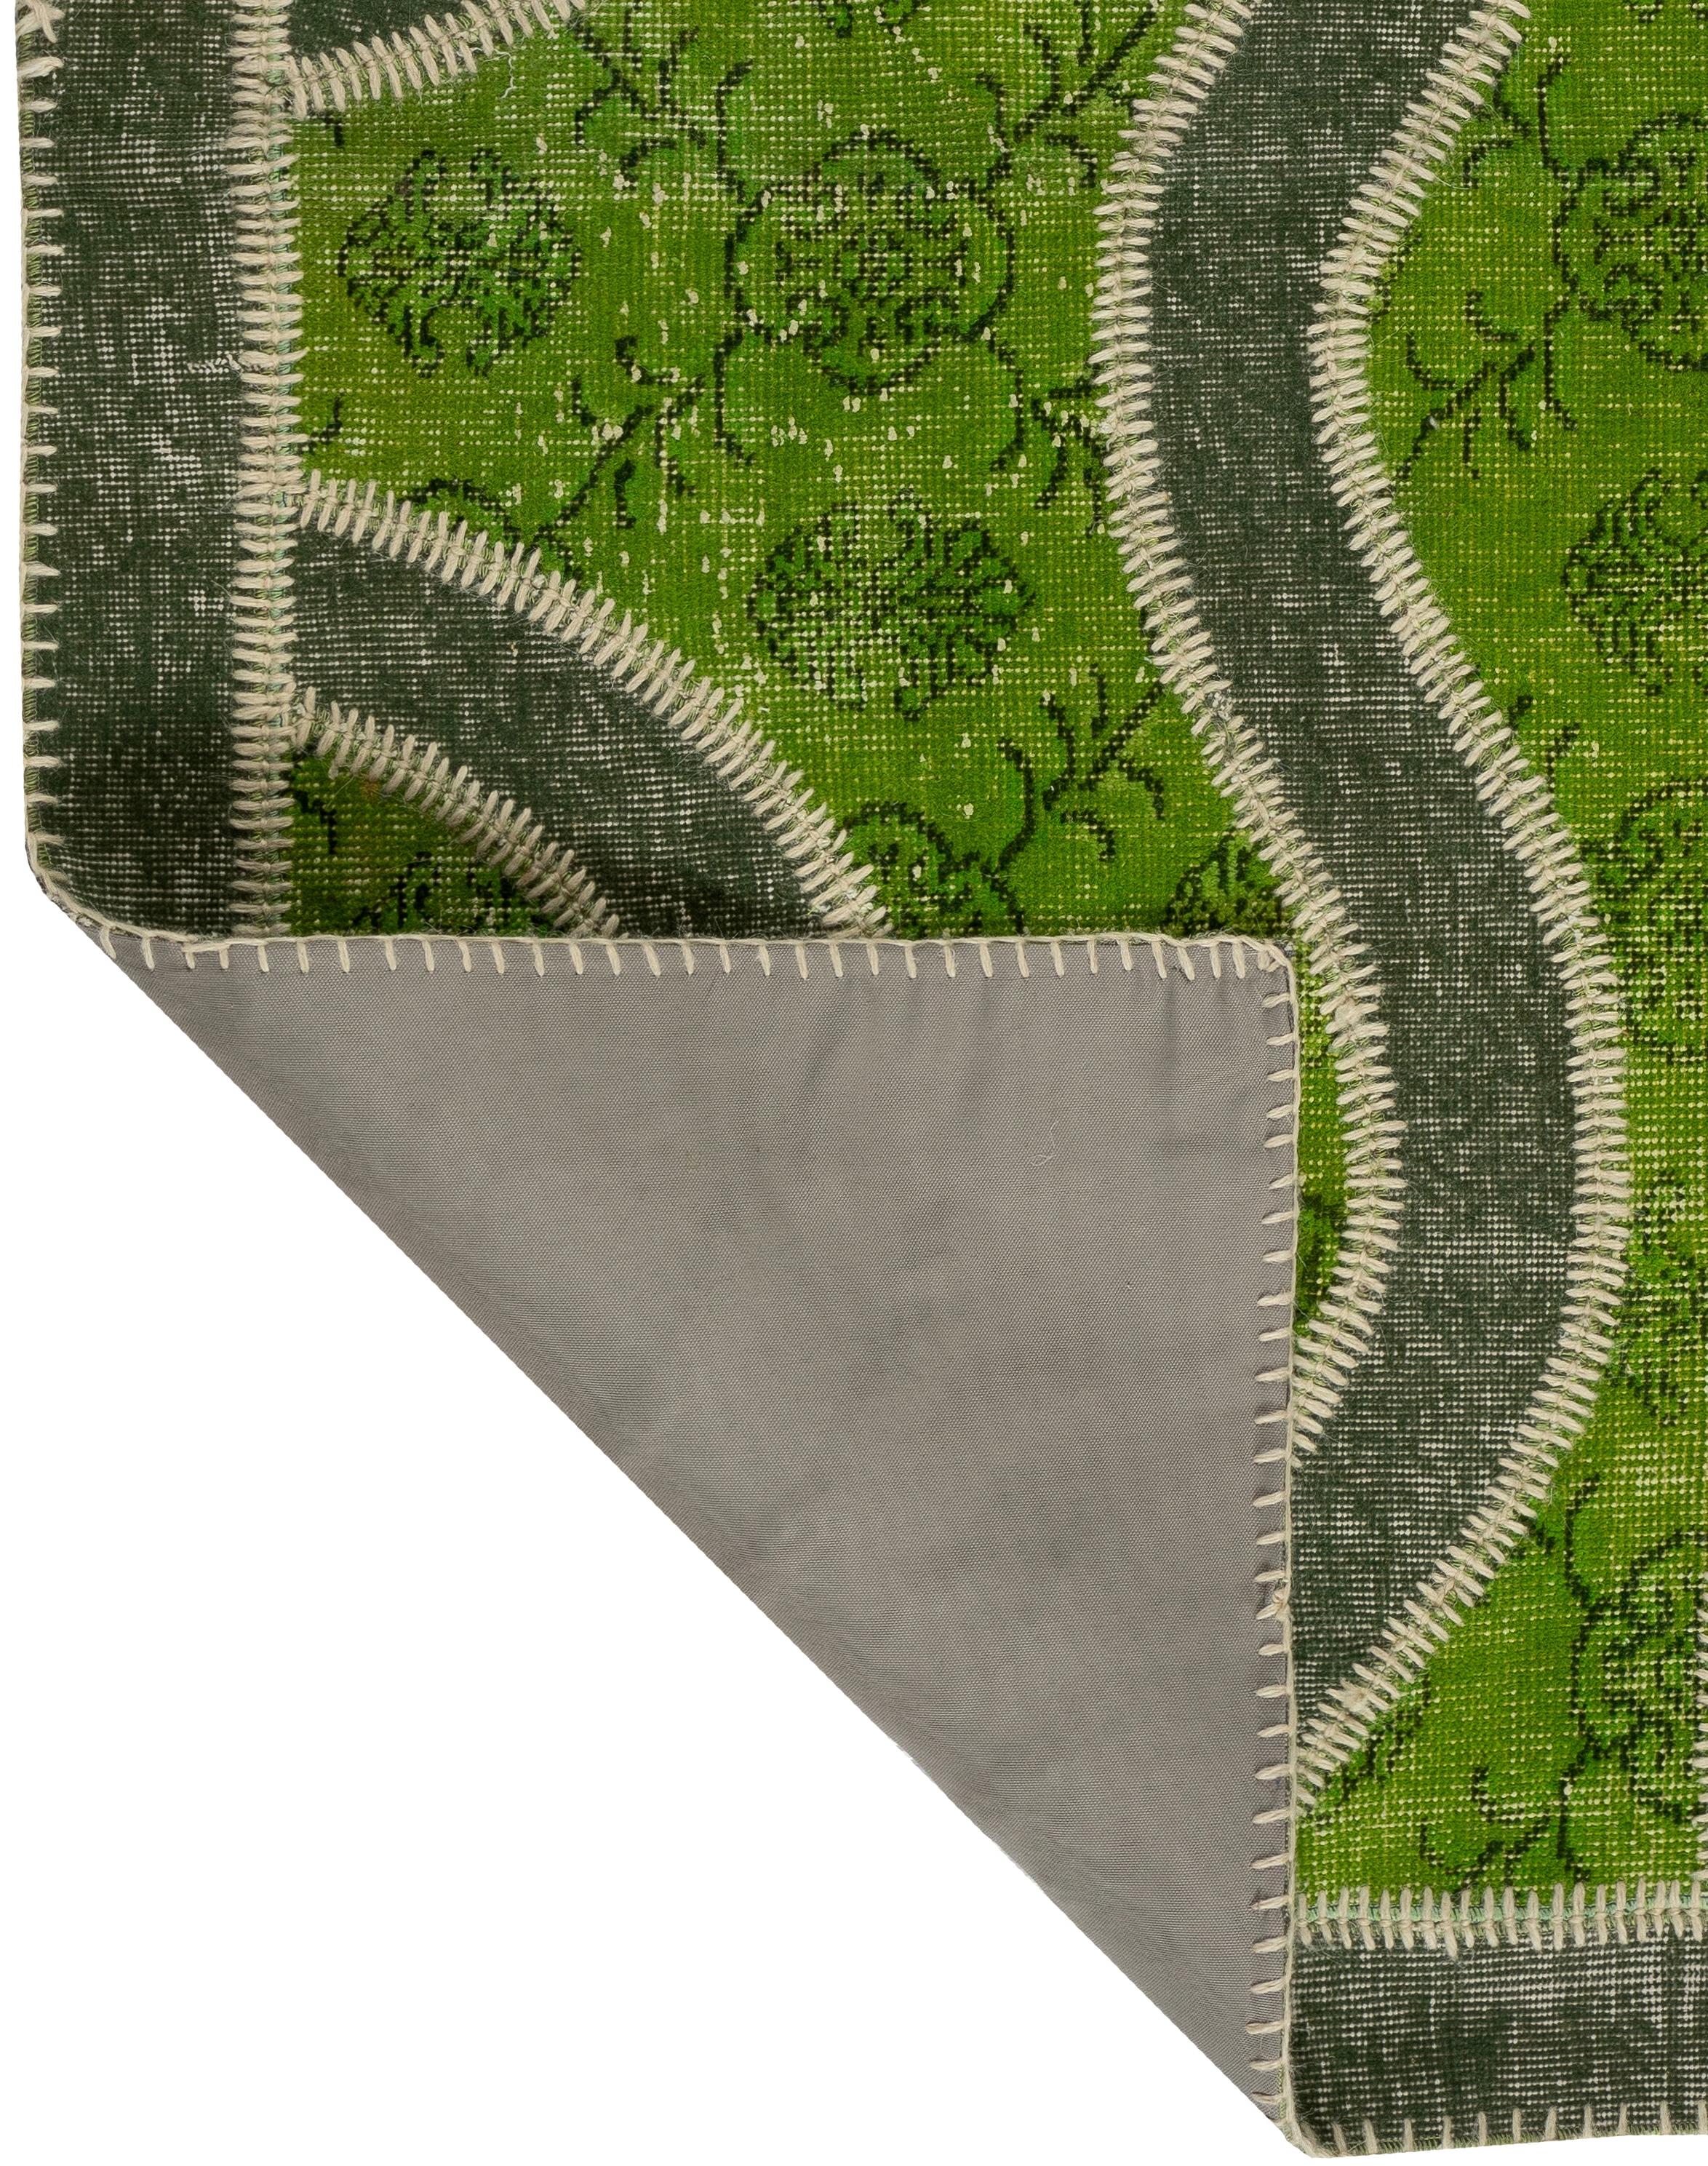 Hand-Woven Handmade Patchwork Rug in Shades of Green. Living Room Decor Woolen Carpet For Sale